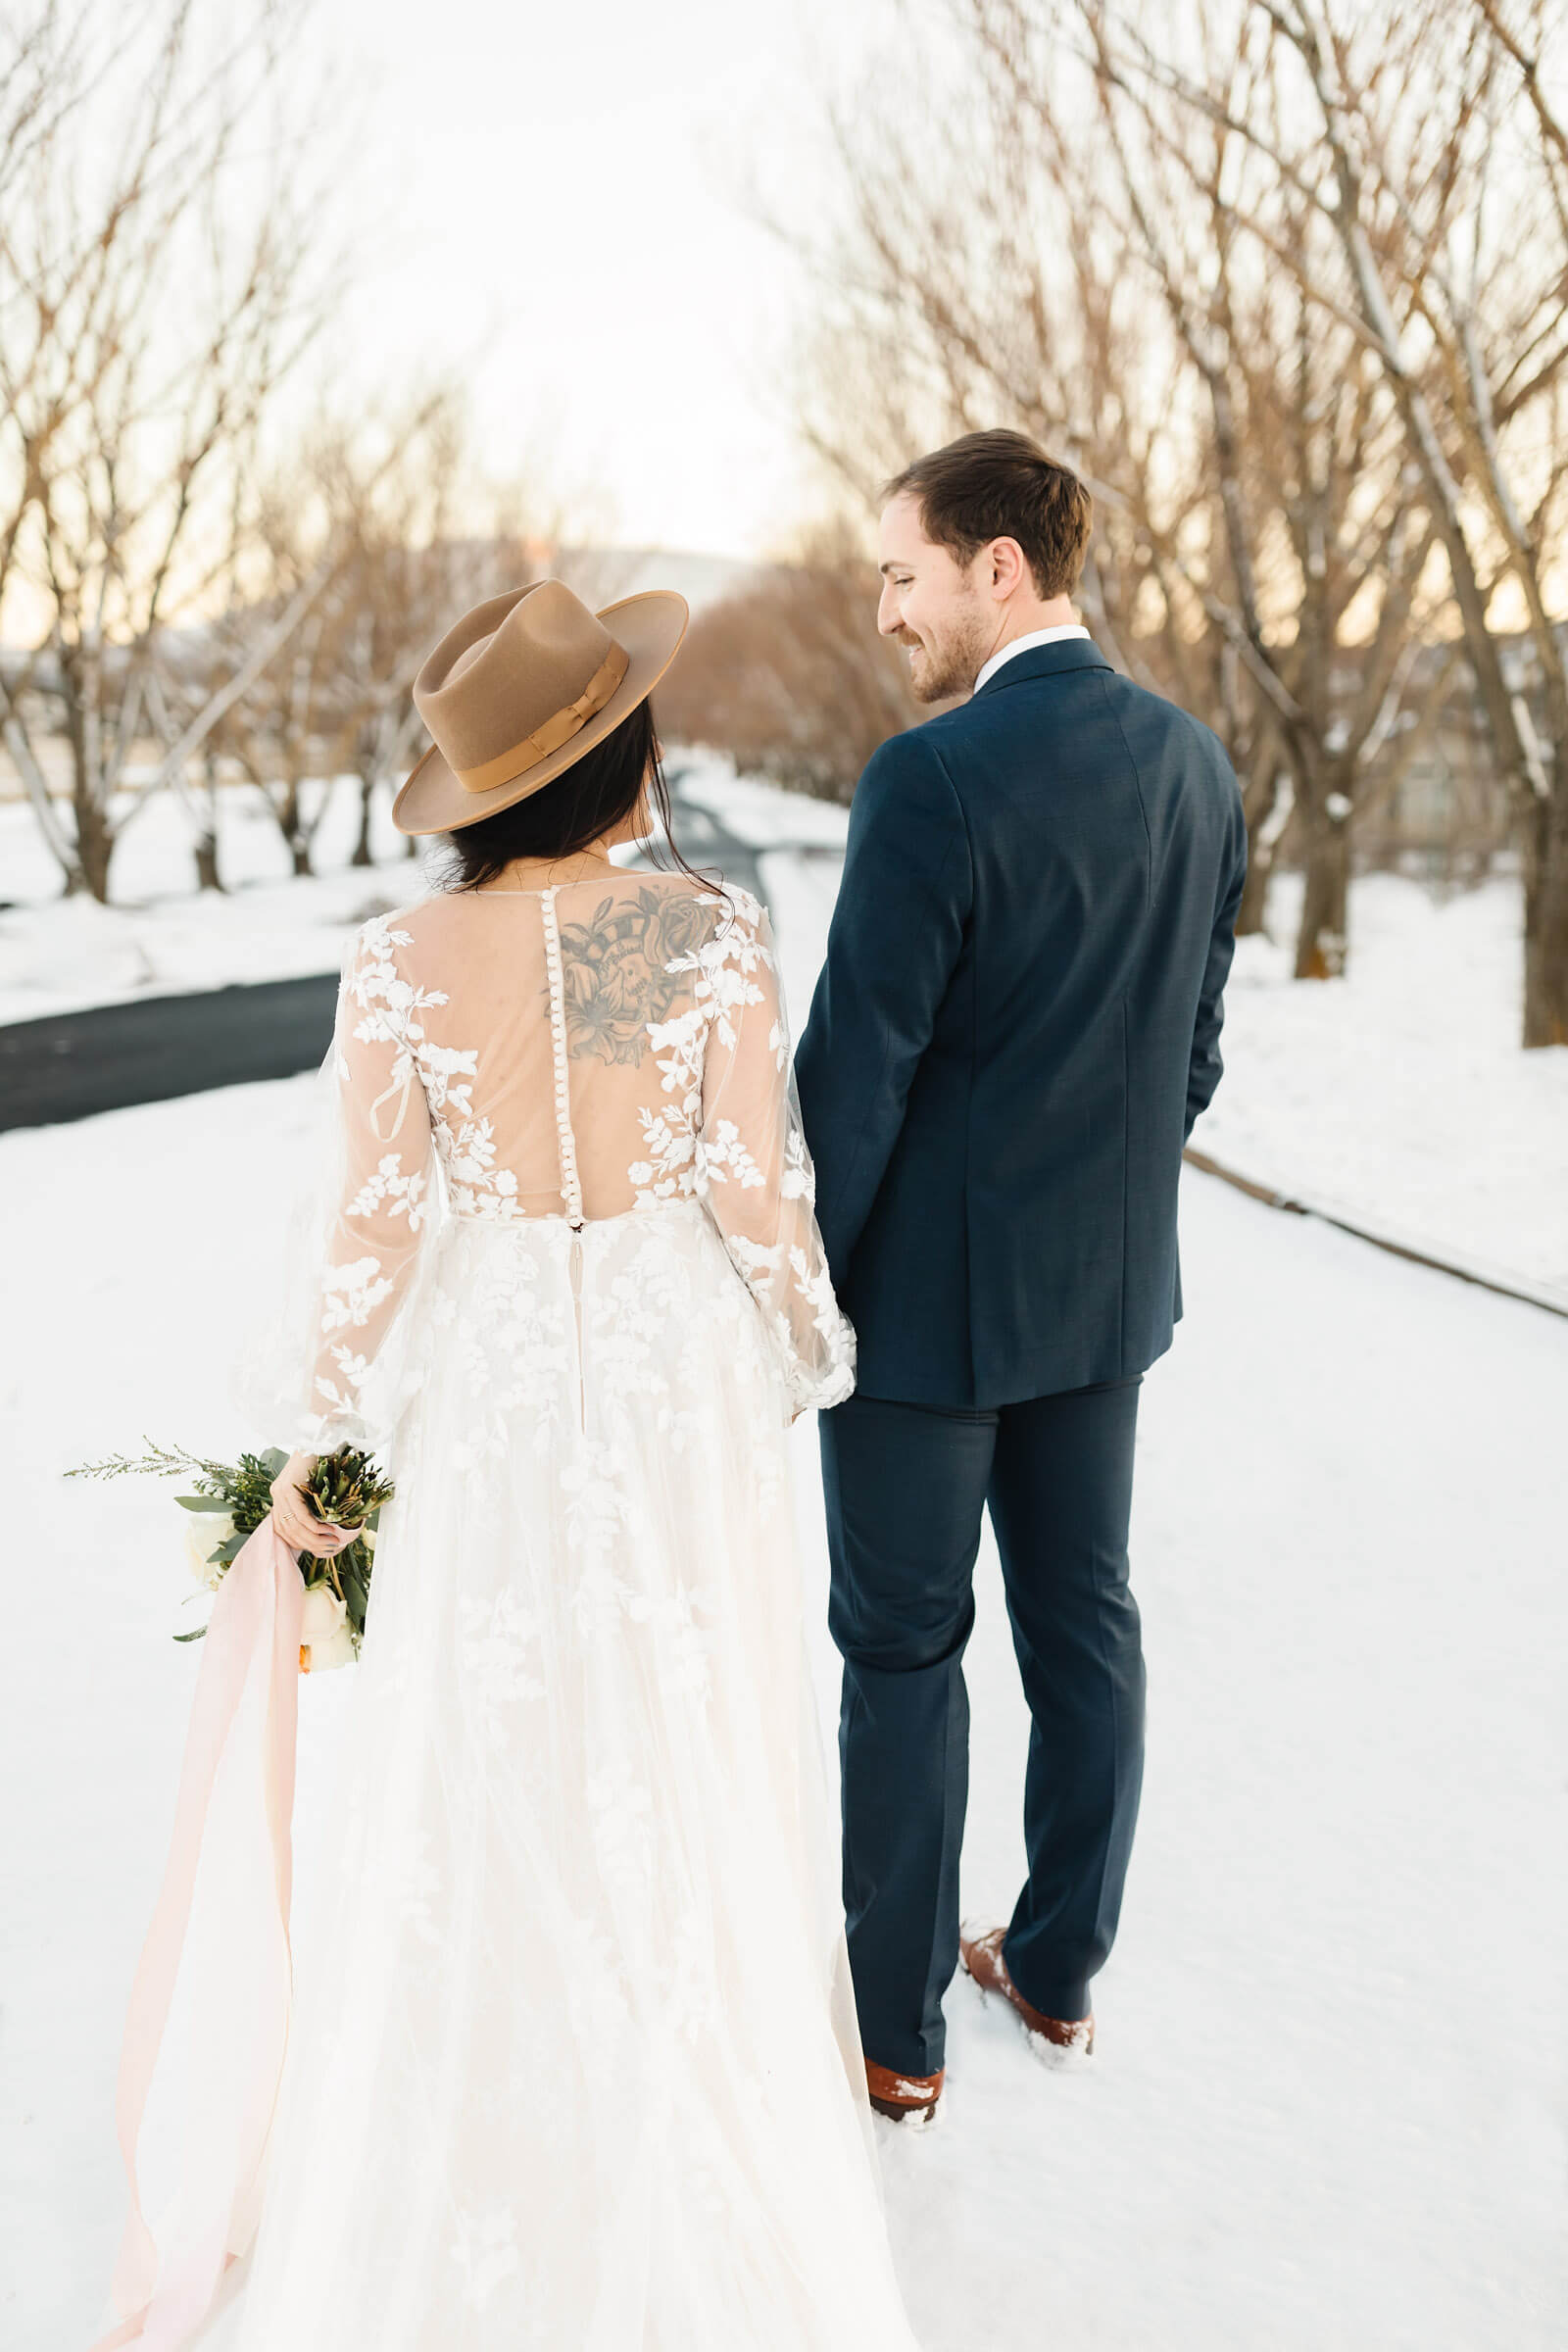 bride and groom holding hands walking down snowy path